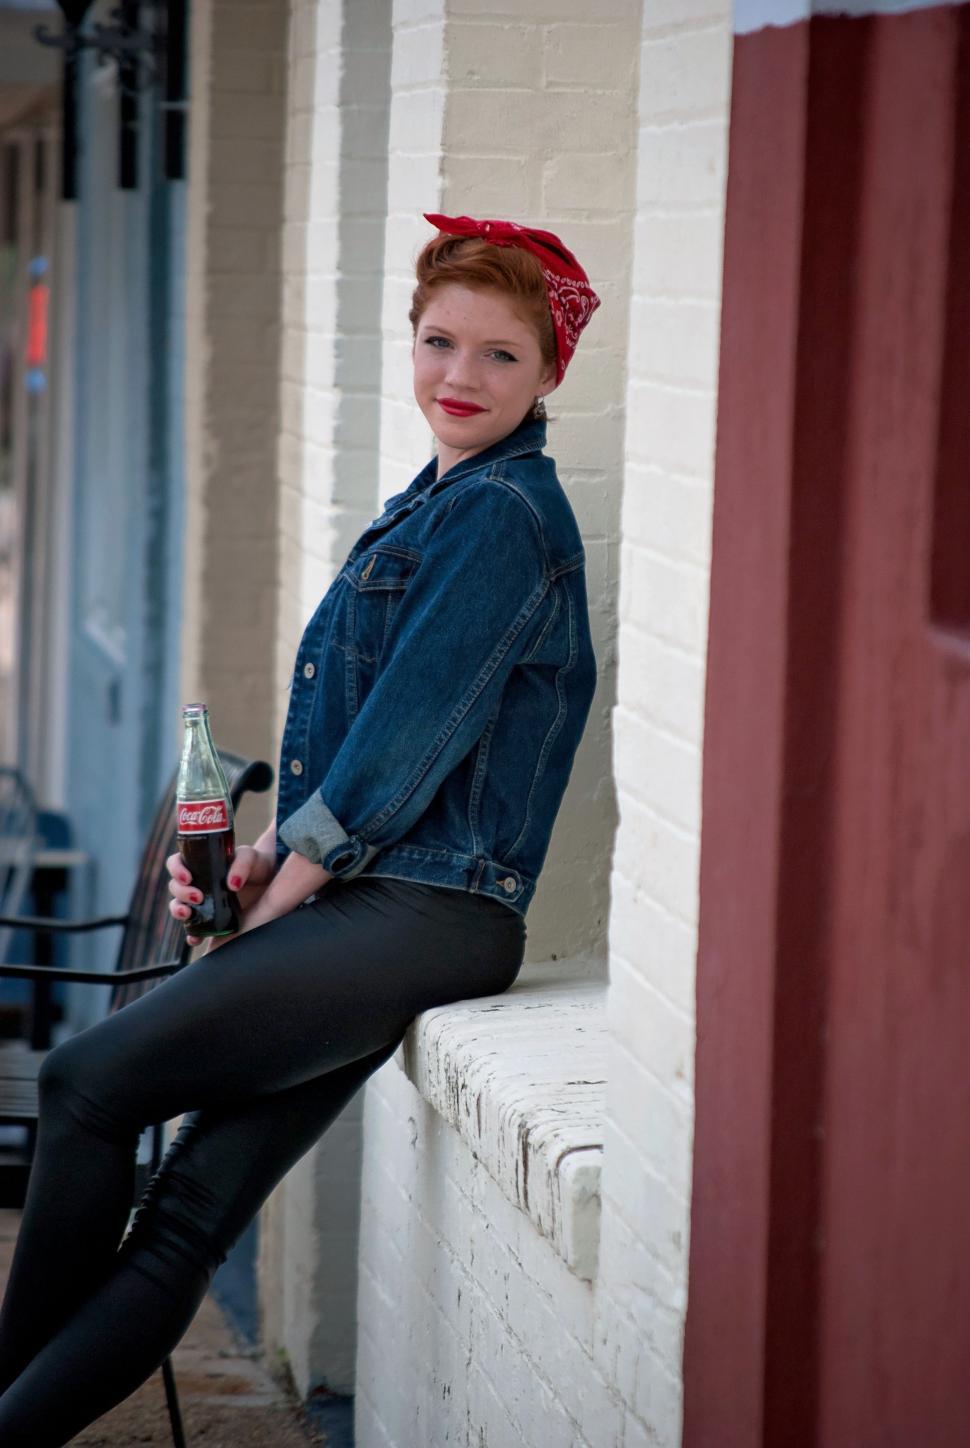 Free Image of Redhead Woman in Vintage Clothing With Coke Bottle Sitting on Window sill 